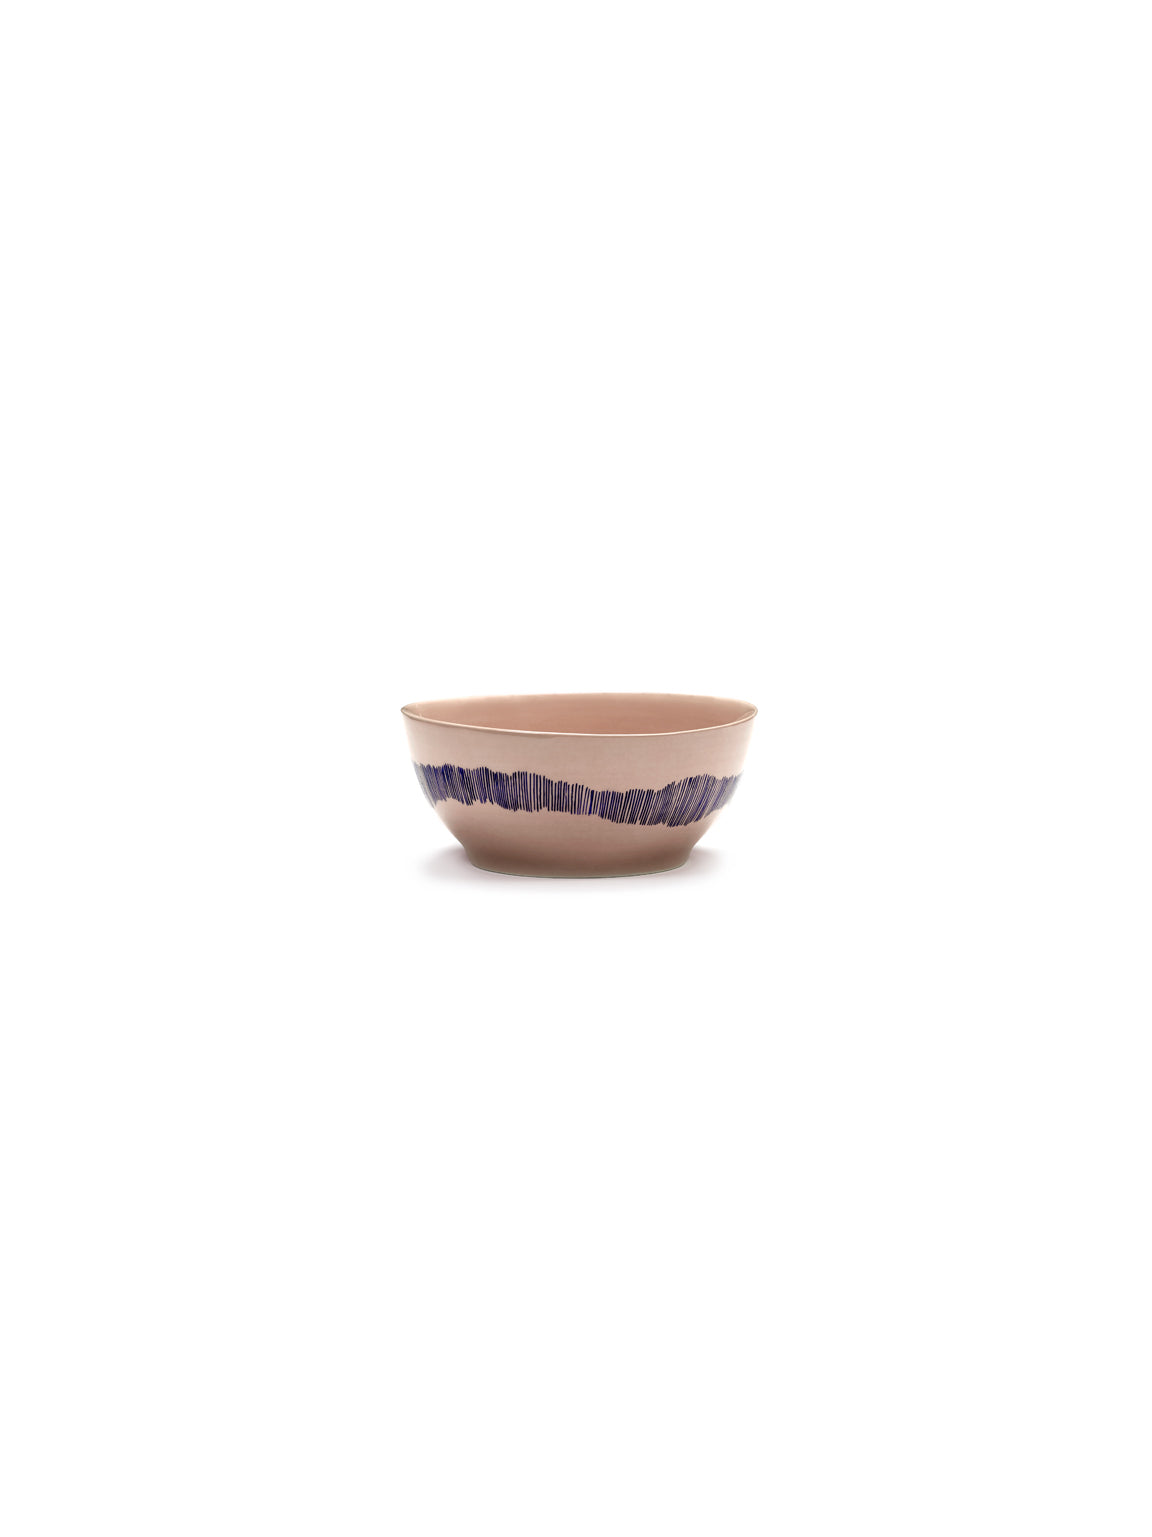 Ottolenghi Feast Small Bowl, Set of 2